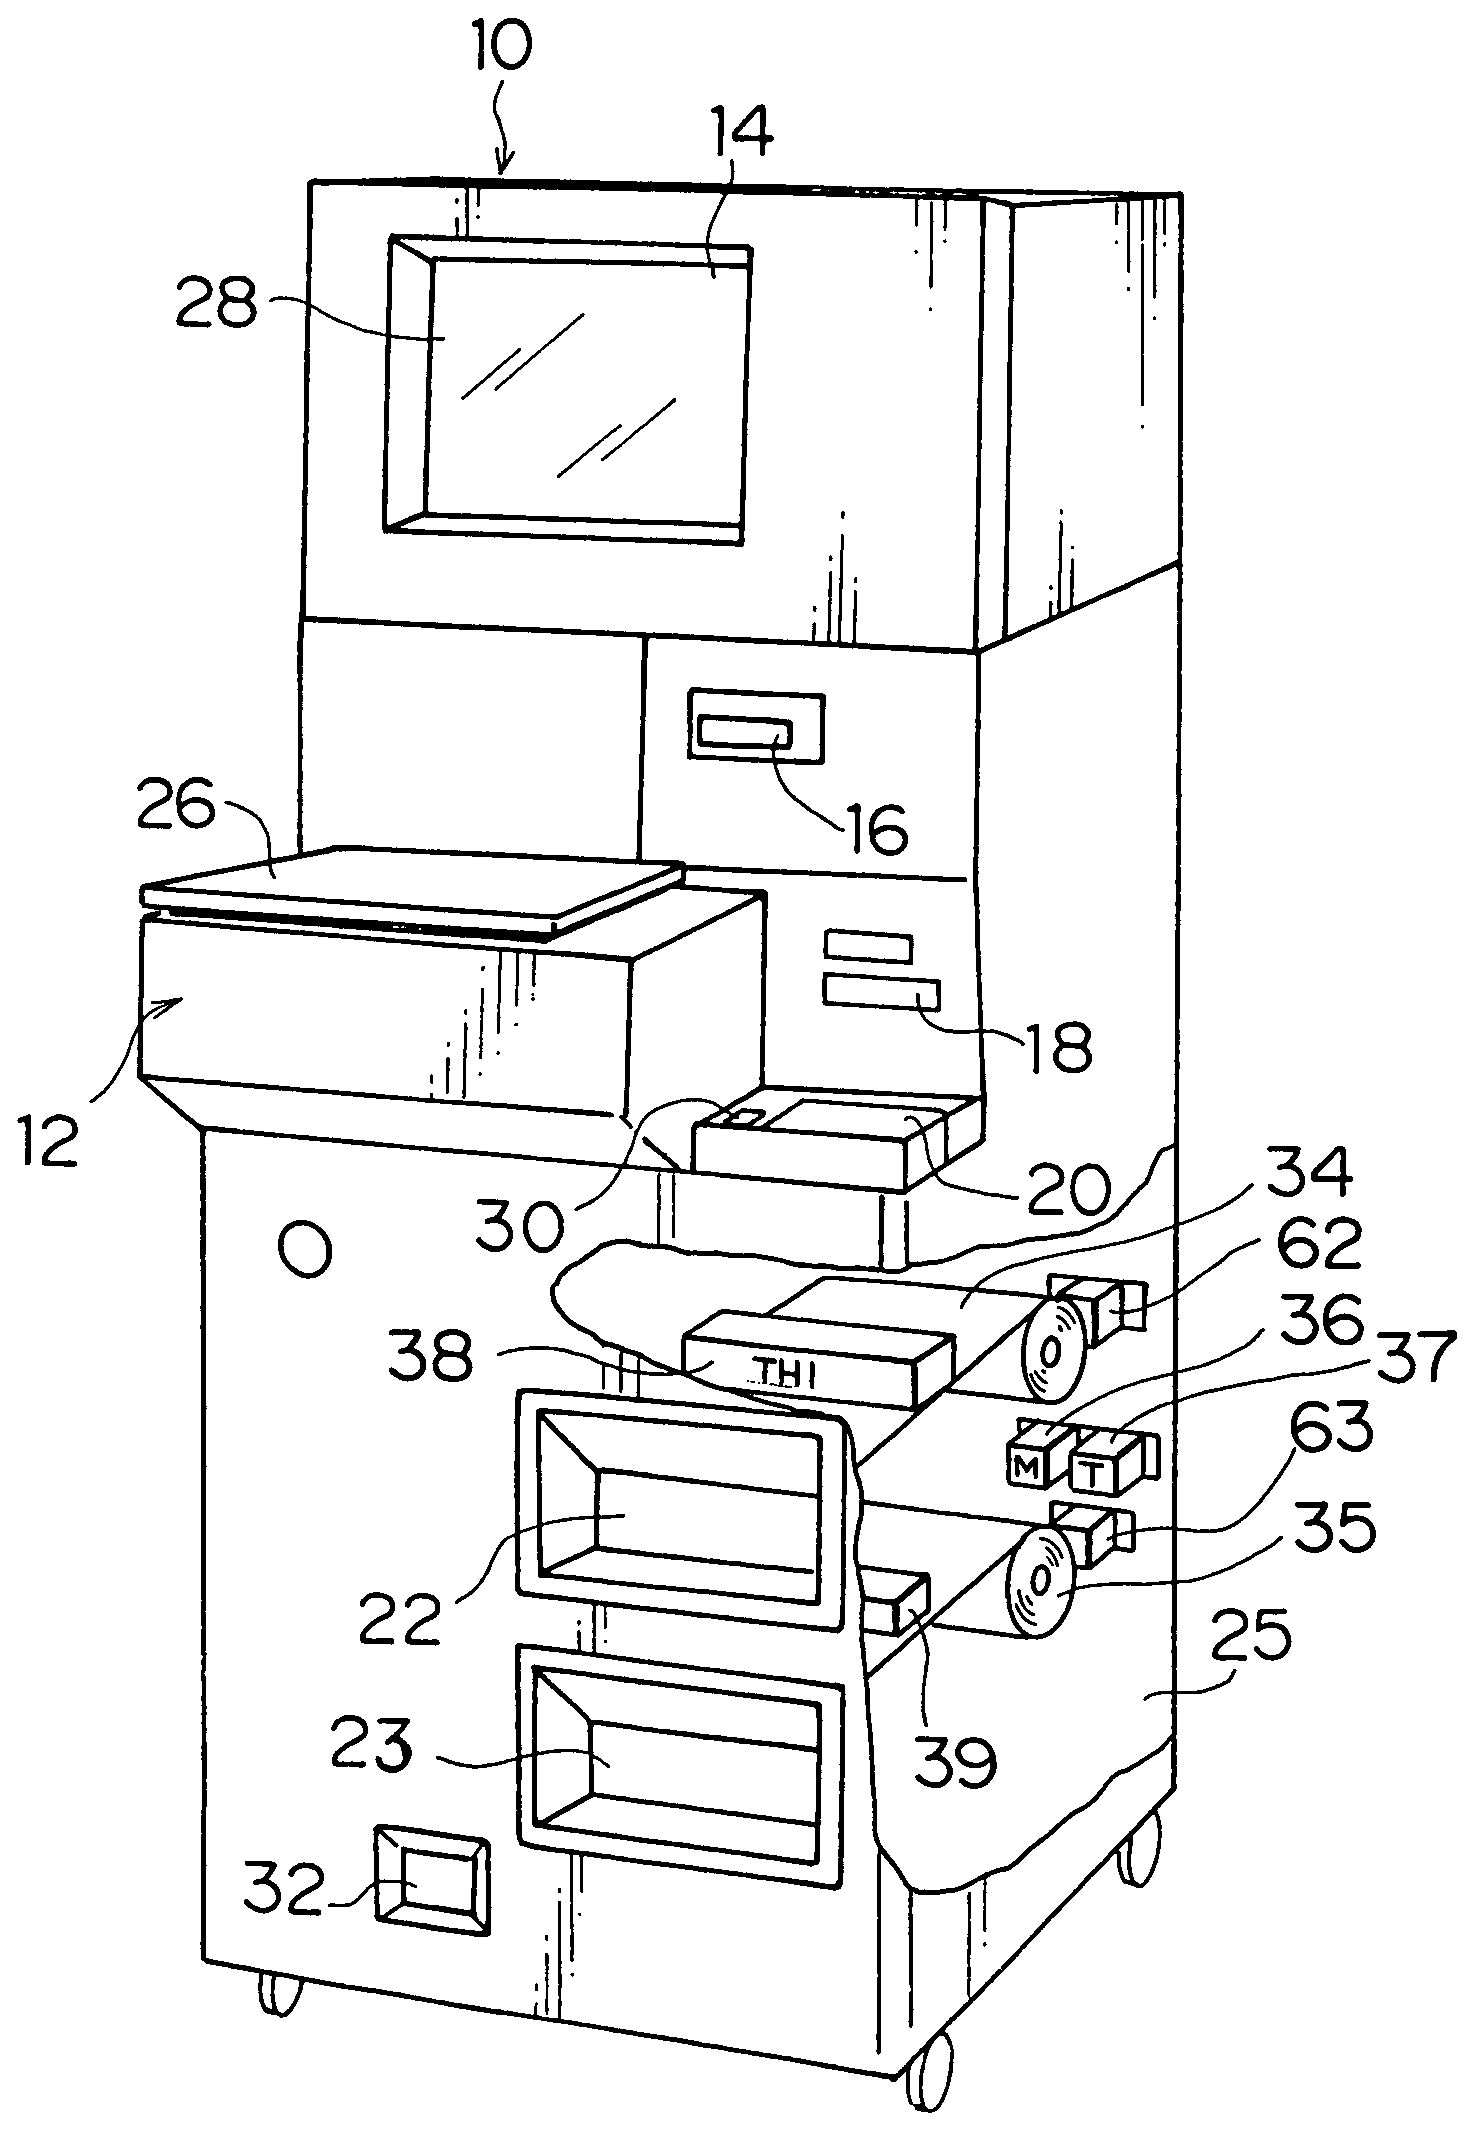 Image outputting system